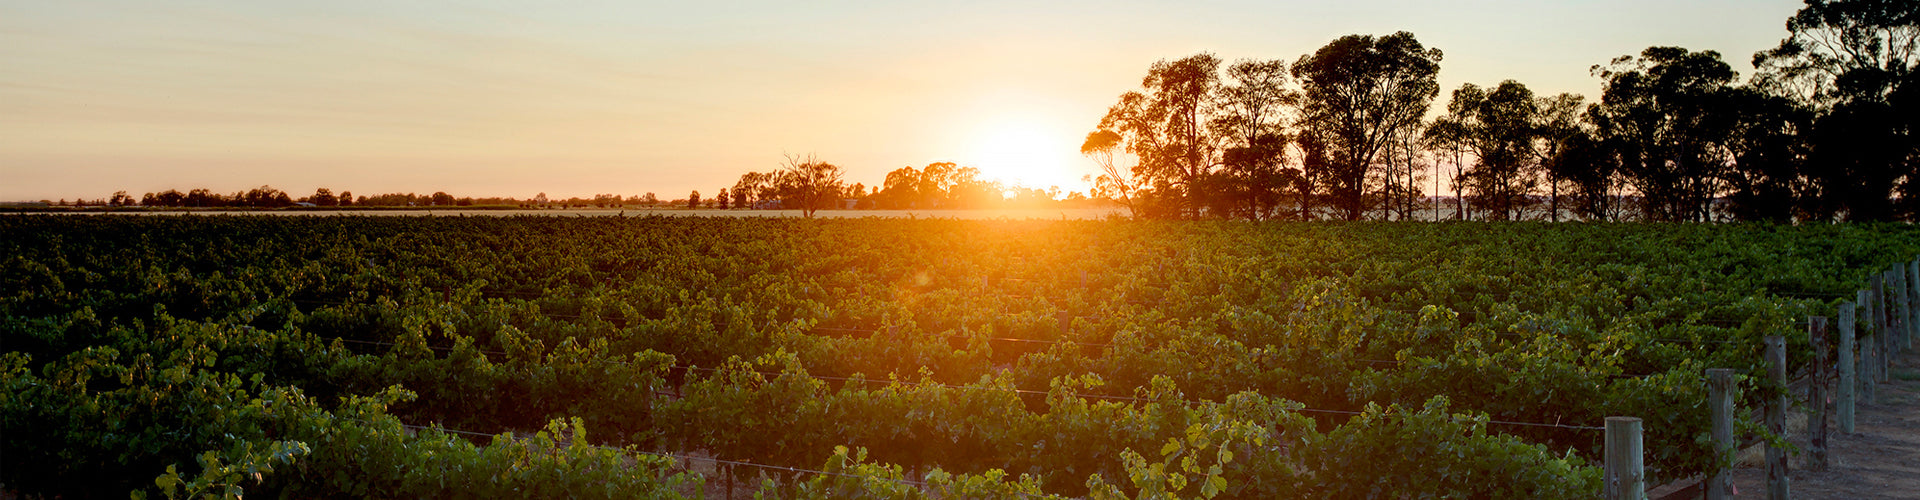 Vineyards in the Riverina region of New South Wales